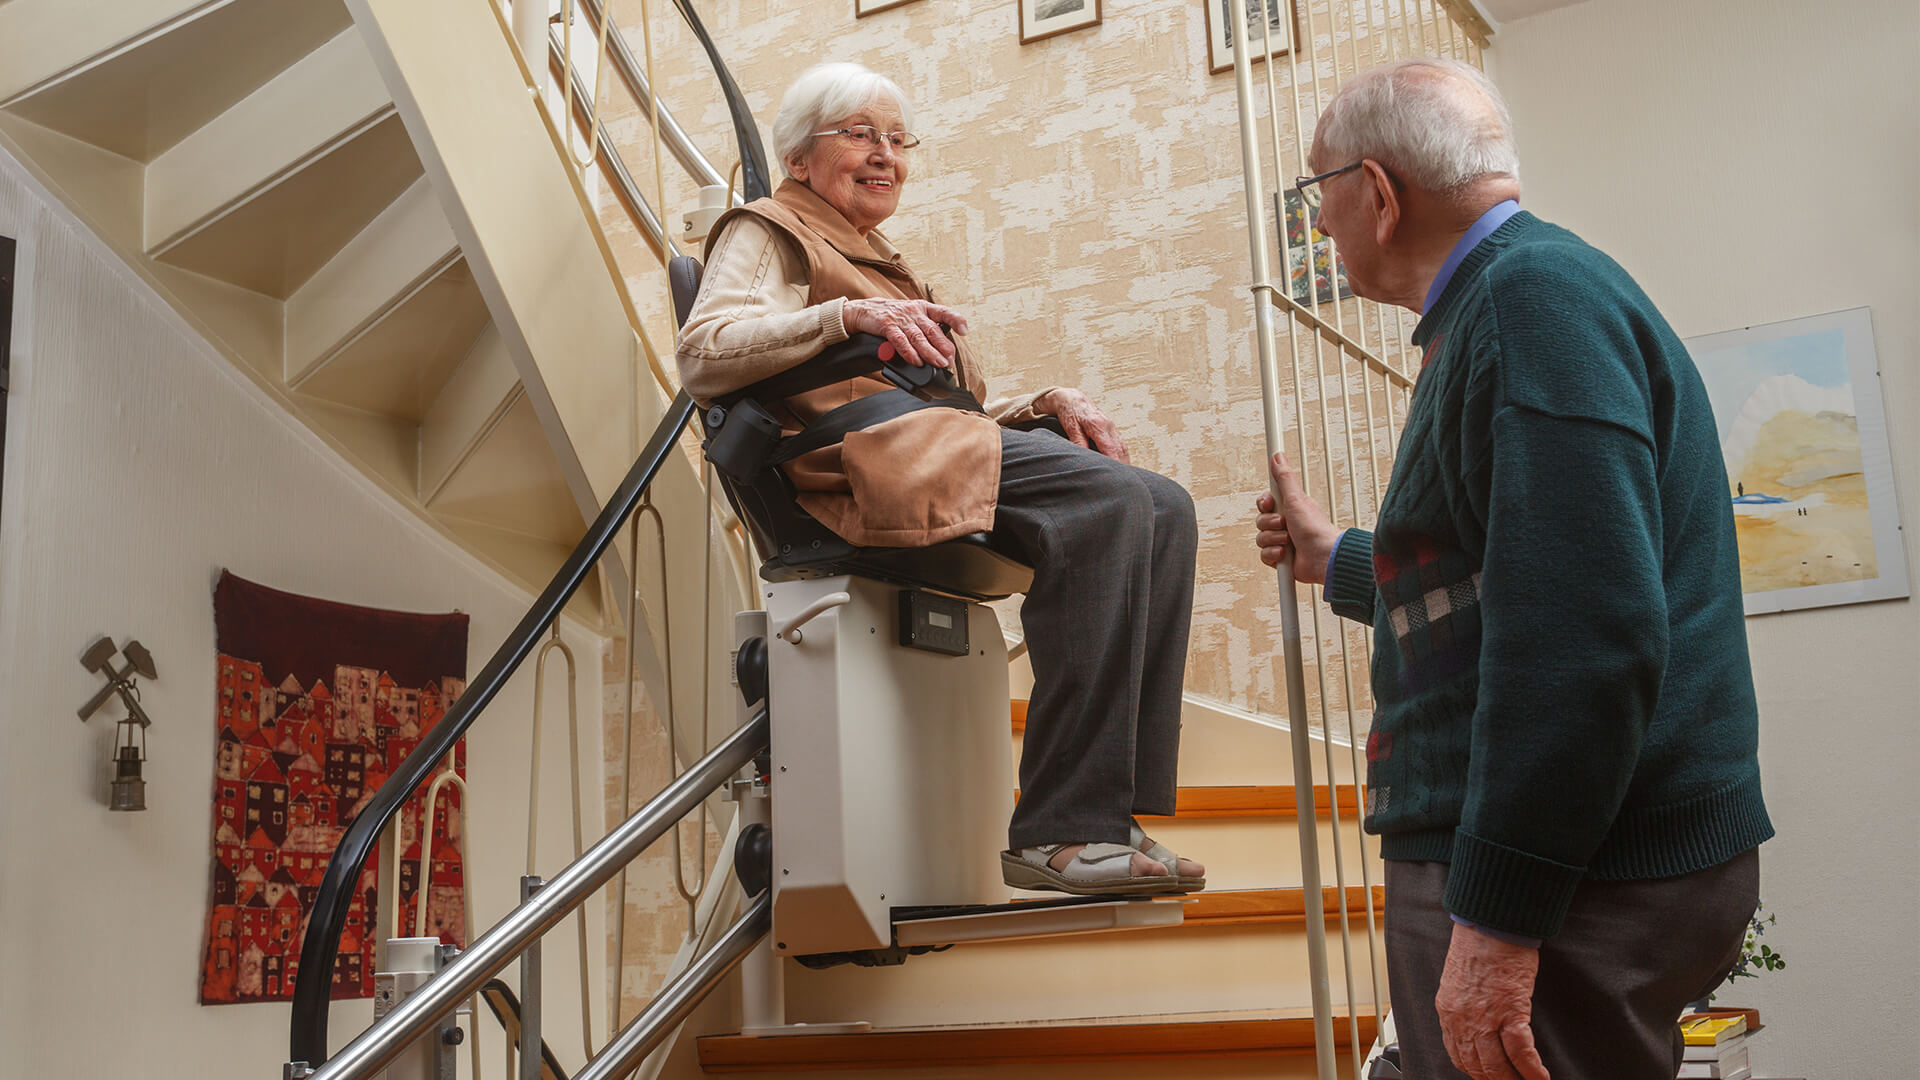 How To Get Help With Home Improvements For The Elderly?